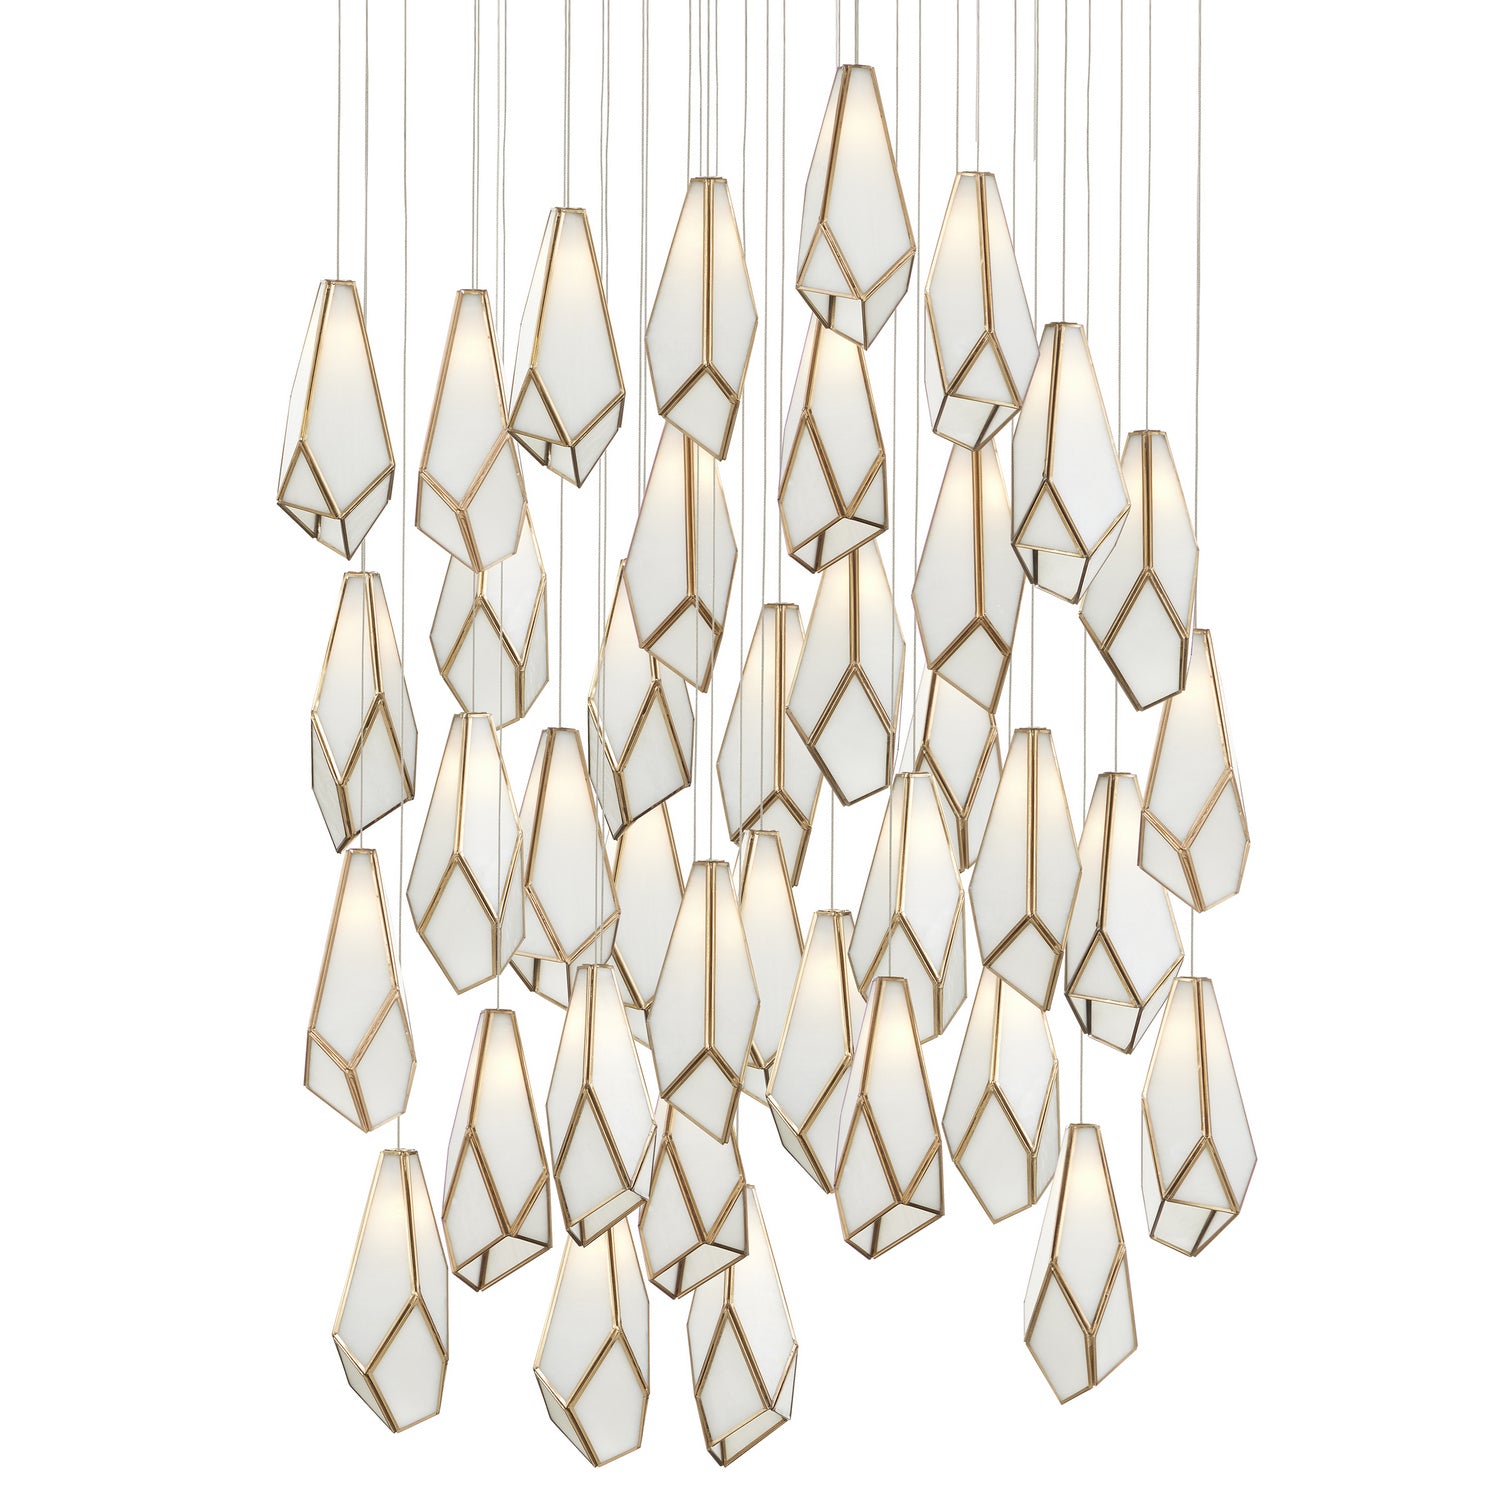 36 Light Pendant from the Glace collection in White/Antique Brass/Silver finish